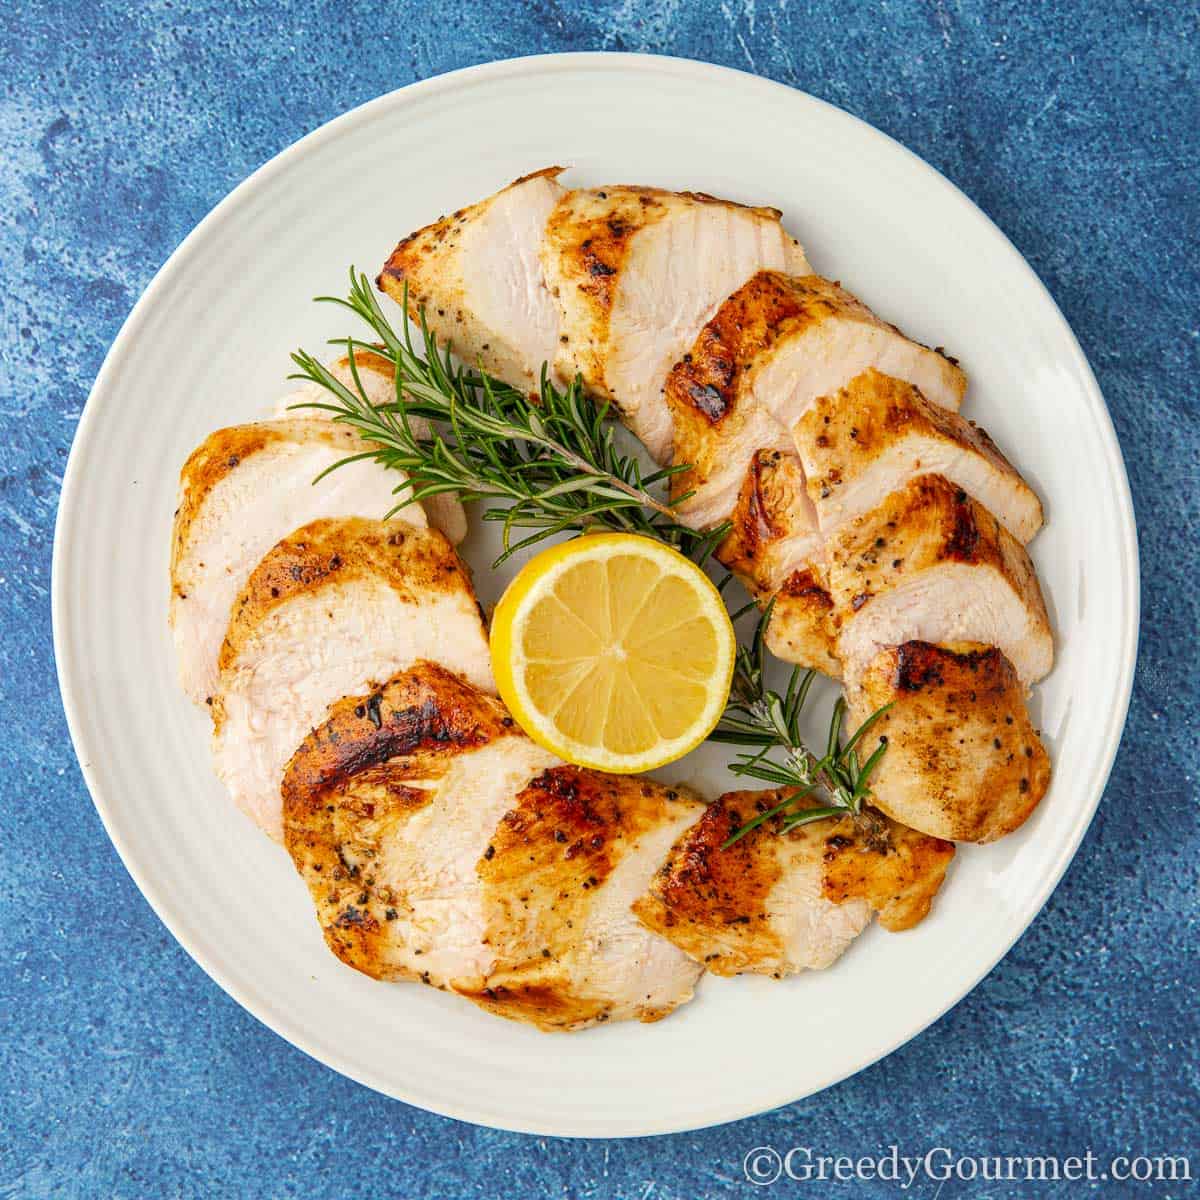 Instant Pot Ultra Chicken Breast~Sous Vide 